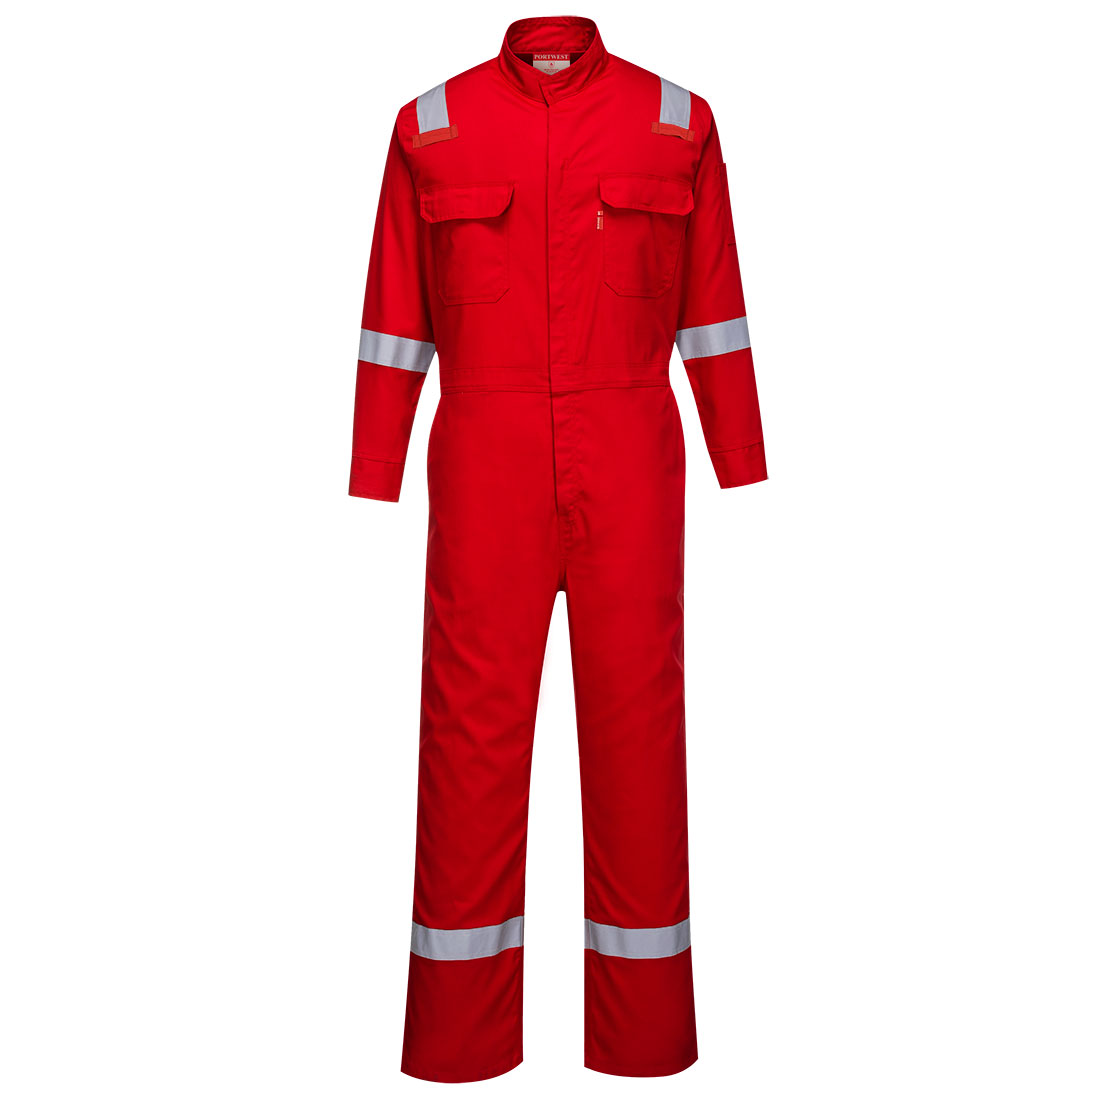 FR94 Portwest® Bizflame® 88/12 Iona Flame Resistant Work Coveralls - Red